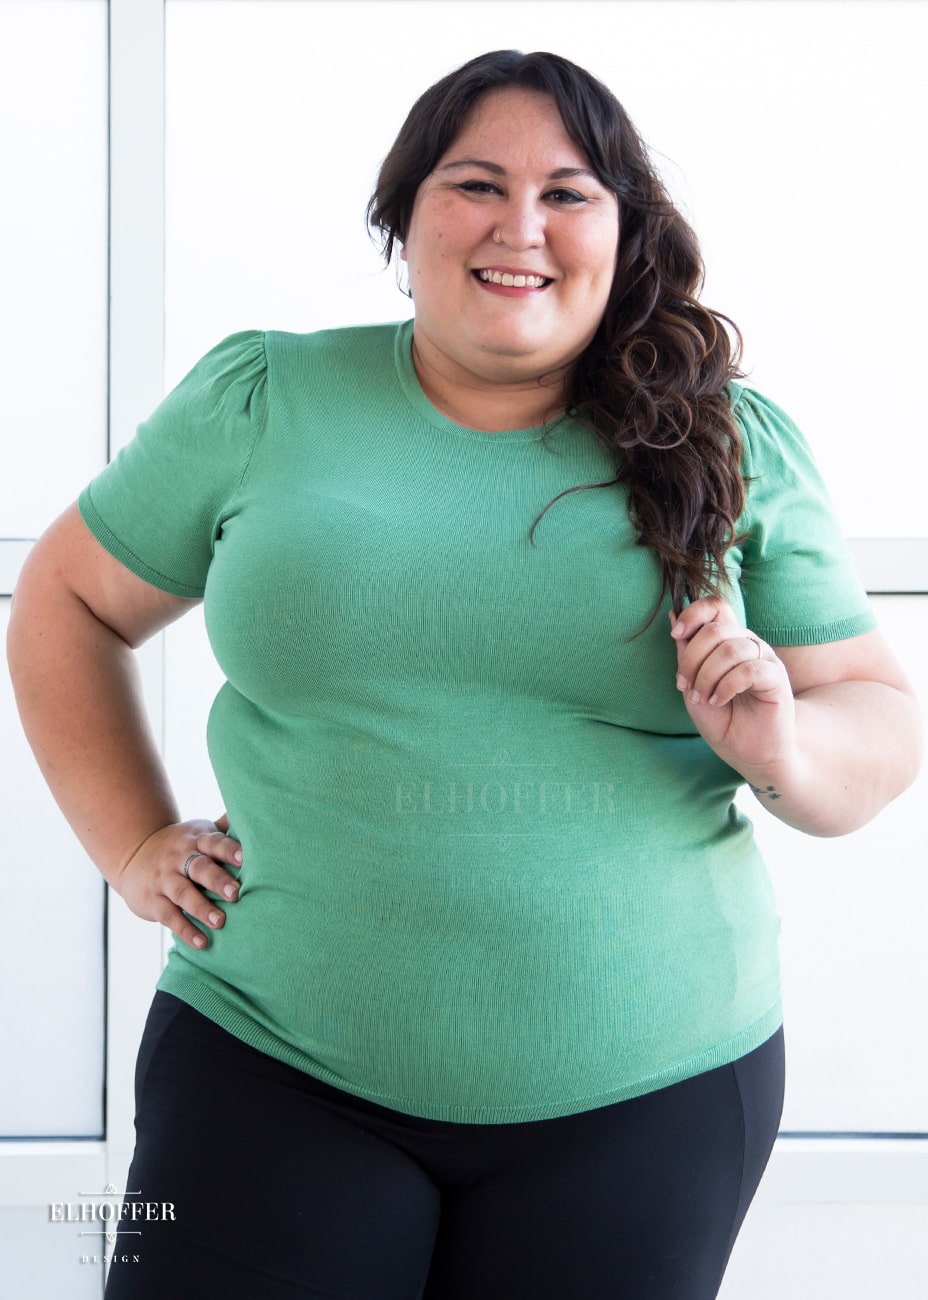 Alysia, a sun kissed skin 2xl model with long wavy dark brown hair, is smiling while wearing a short sleeve light weight sage green knit top. The top hits about mid hip in length and the sleeves have pleated gathering at the shoulders.